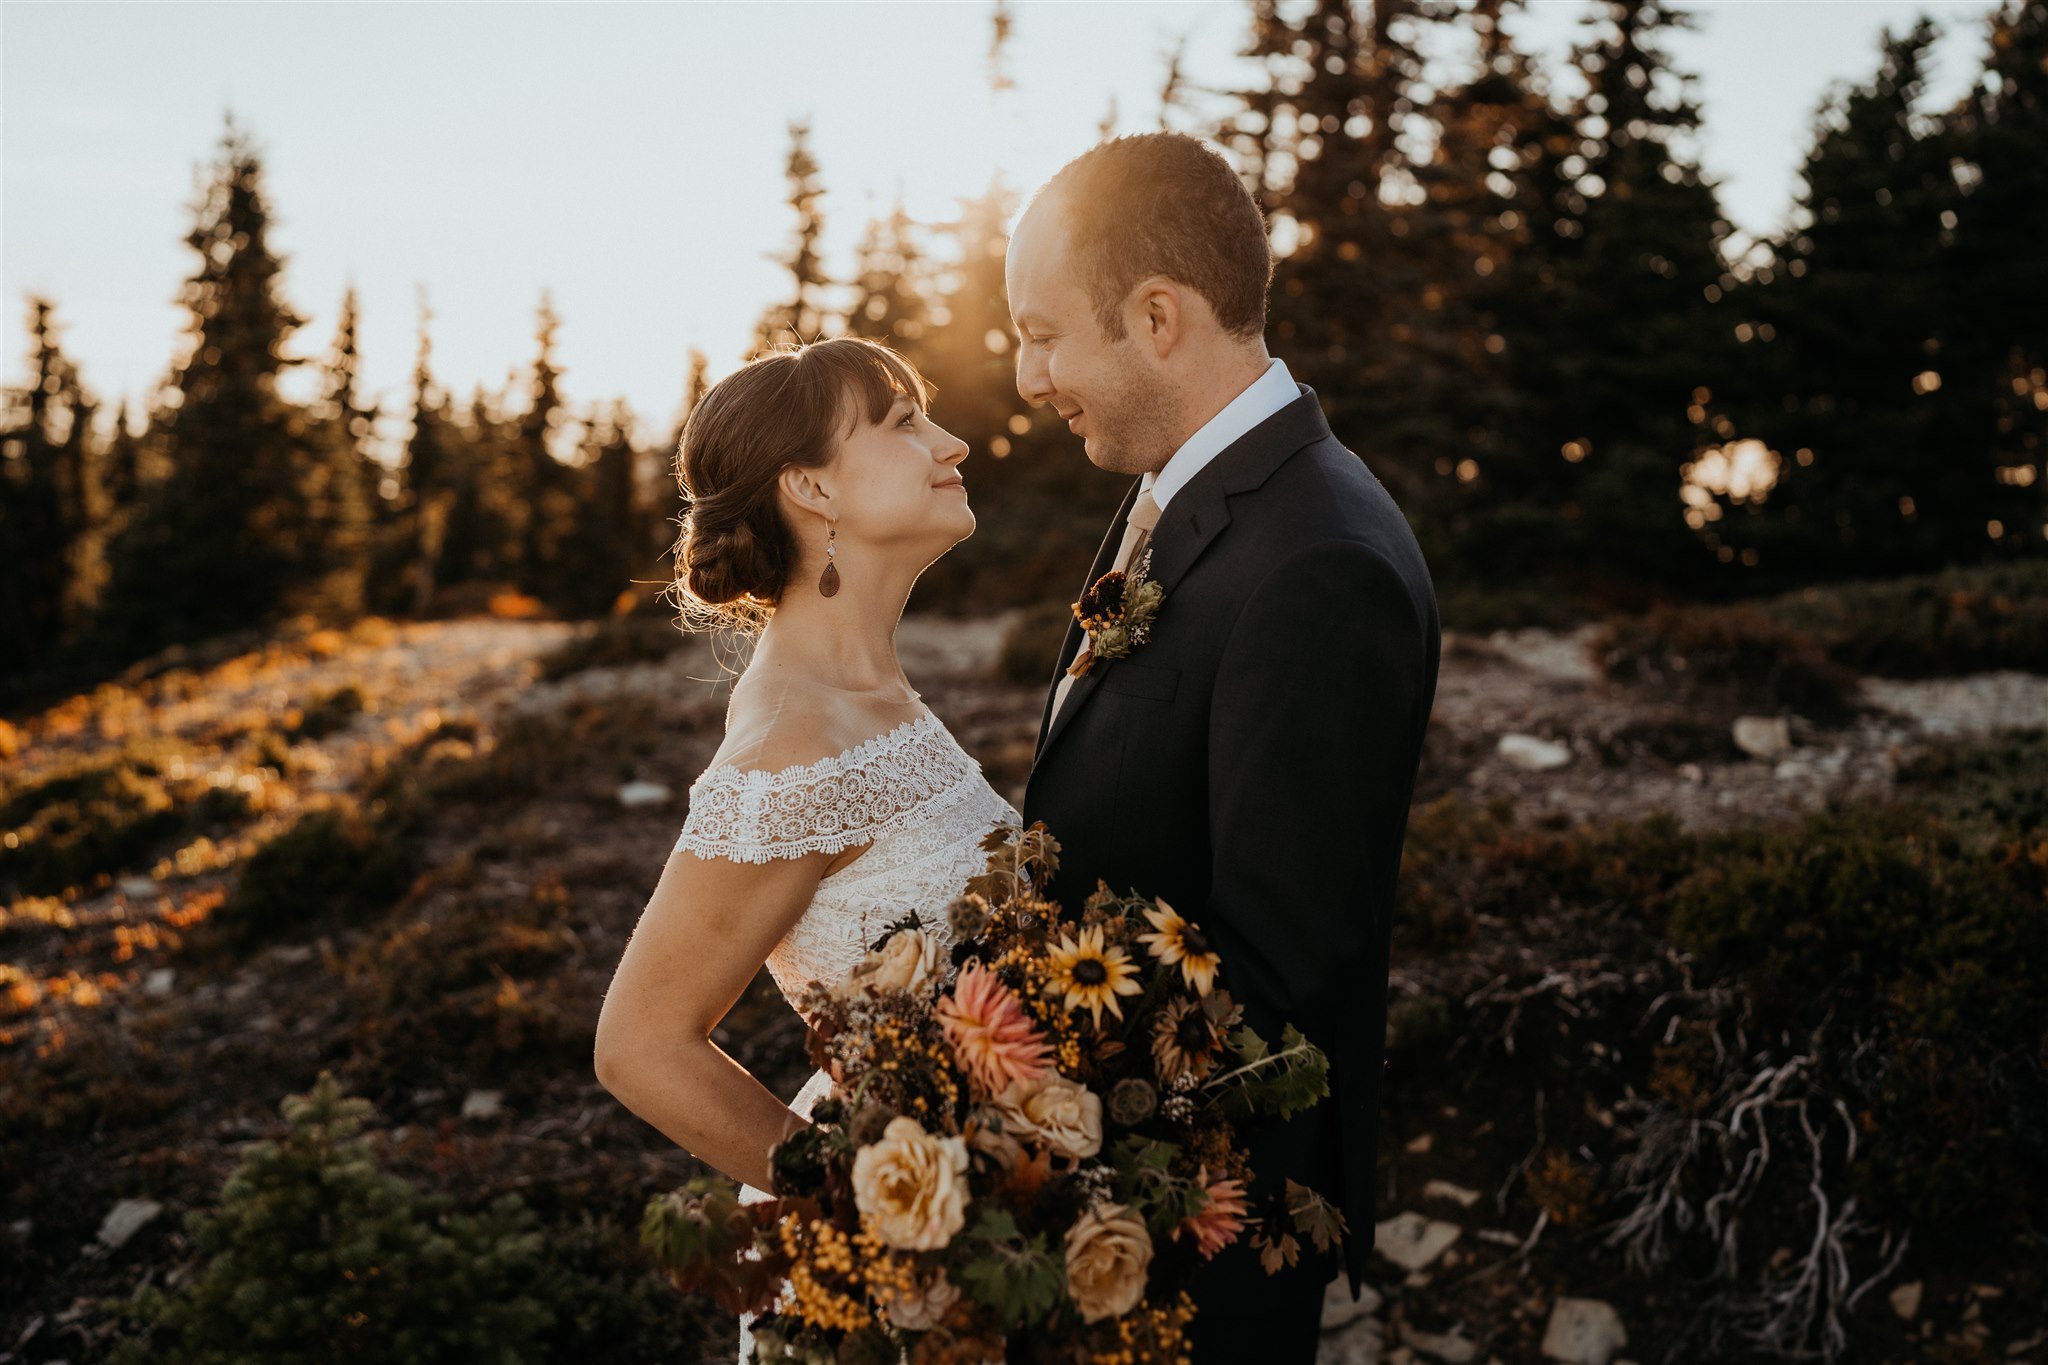 Bride and groom portrait during fall wedding at Mount Rainier